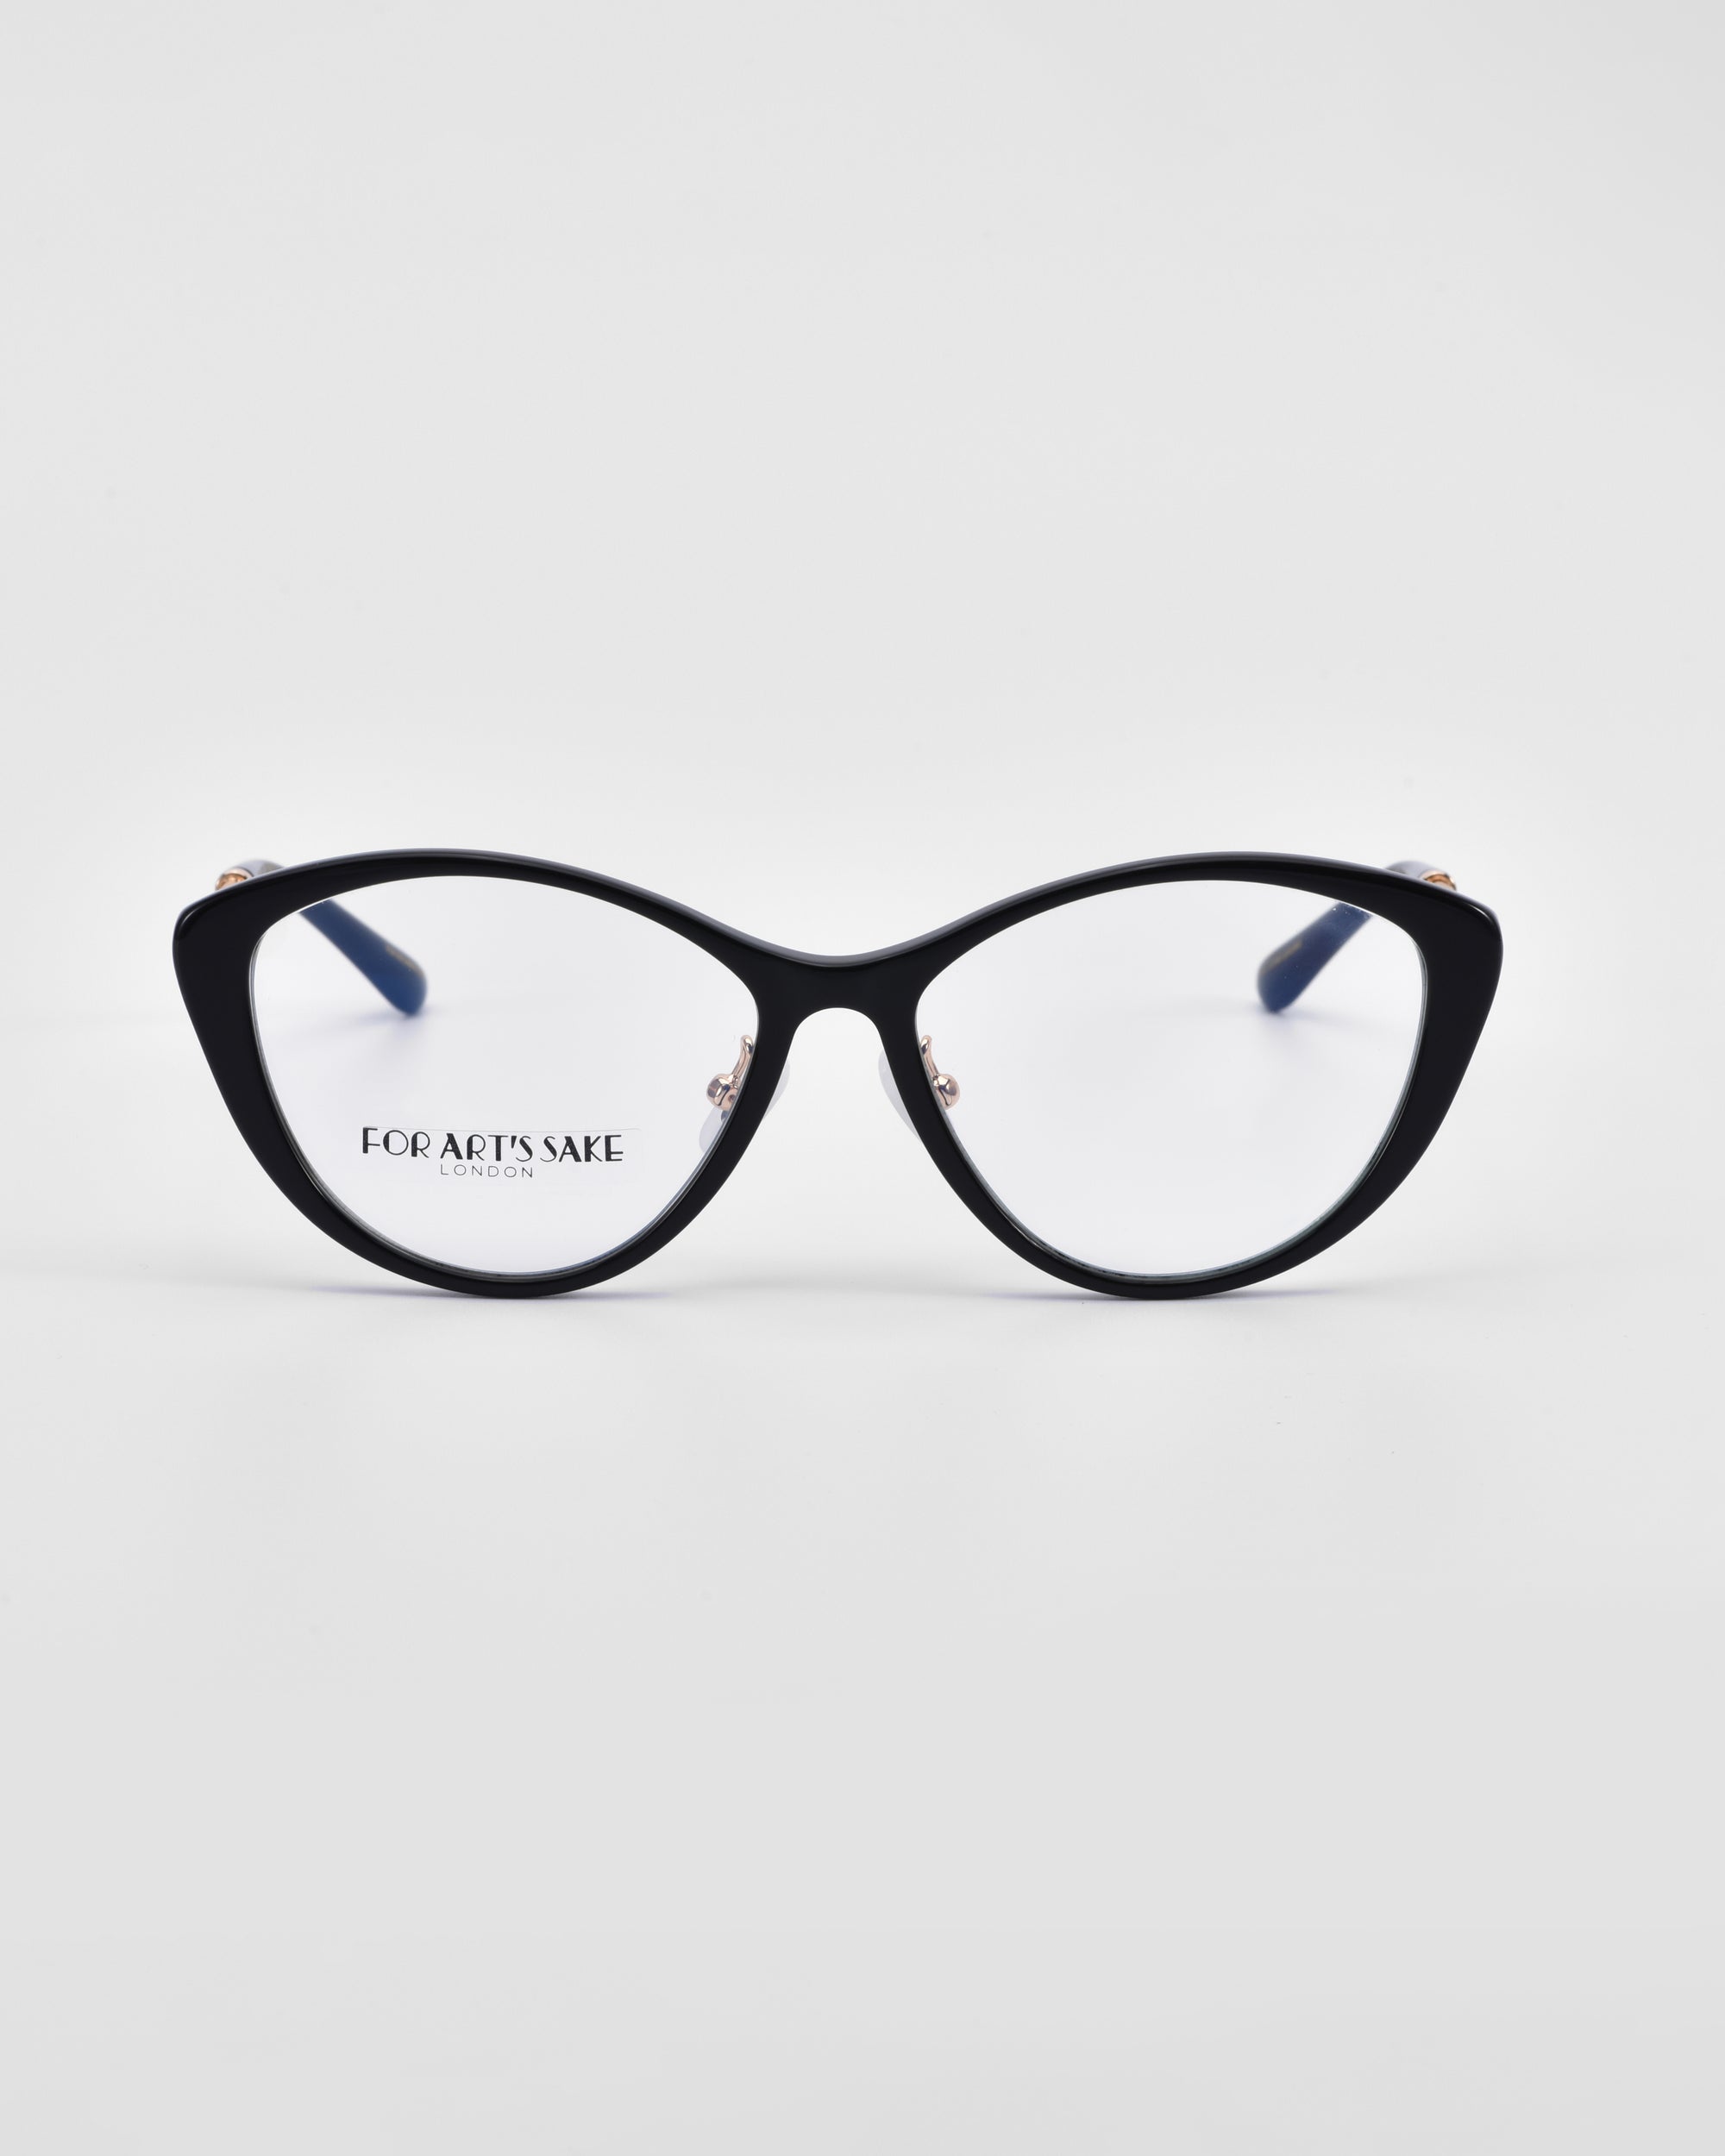 A pair of black cat-eye glasses with clear lenses is shown against a white background. The glasses feature jade-stone nose pads and an 18-karat gold plating, boasting a sleek and modern design with "For Art's Sake®" branding visible on the inside of one lens.